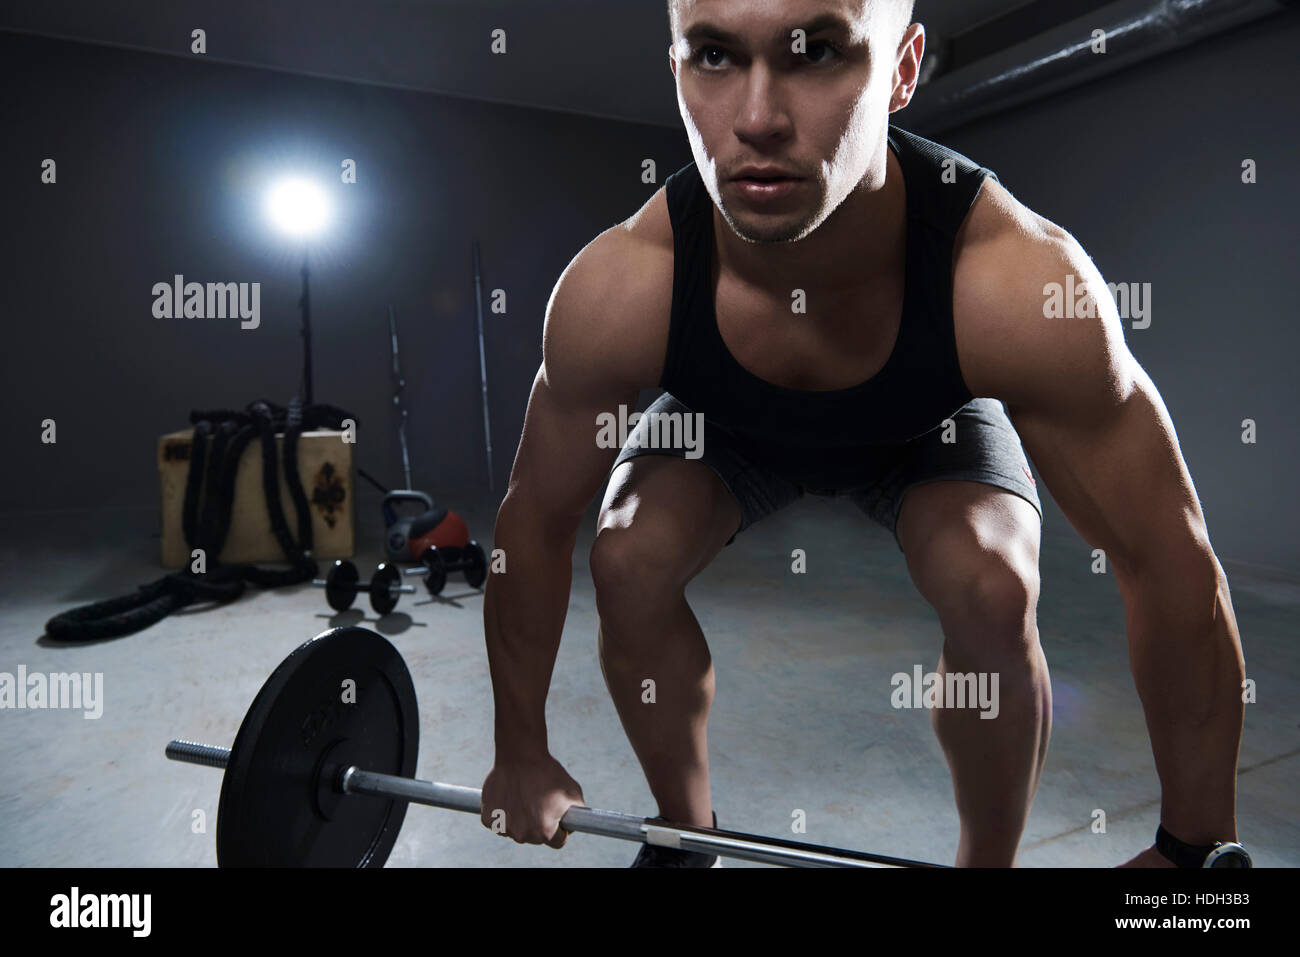 Front view of man lifting some weights Stock Photo